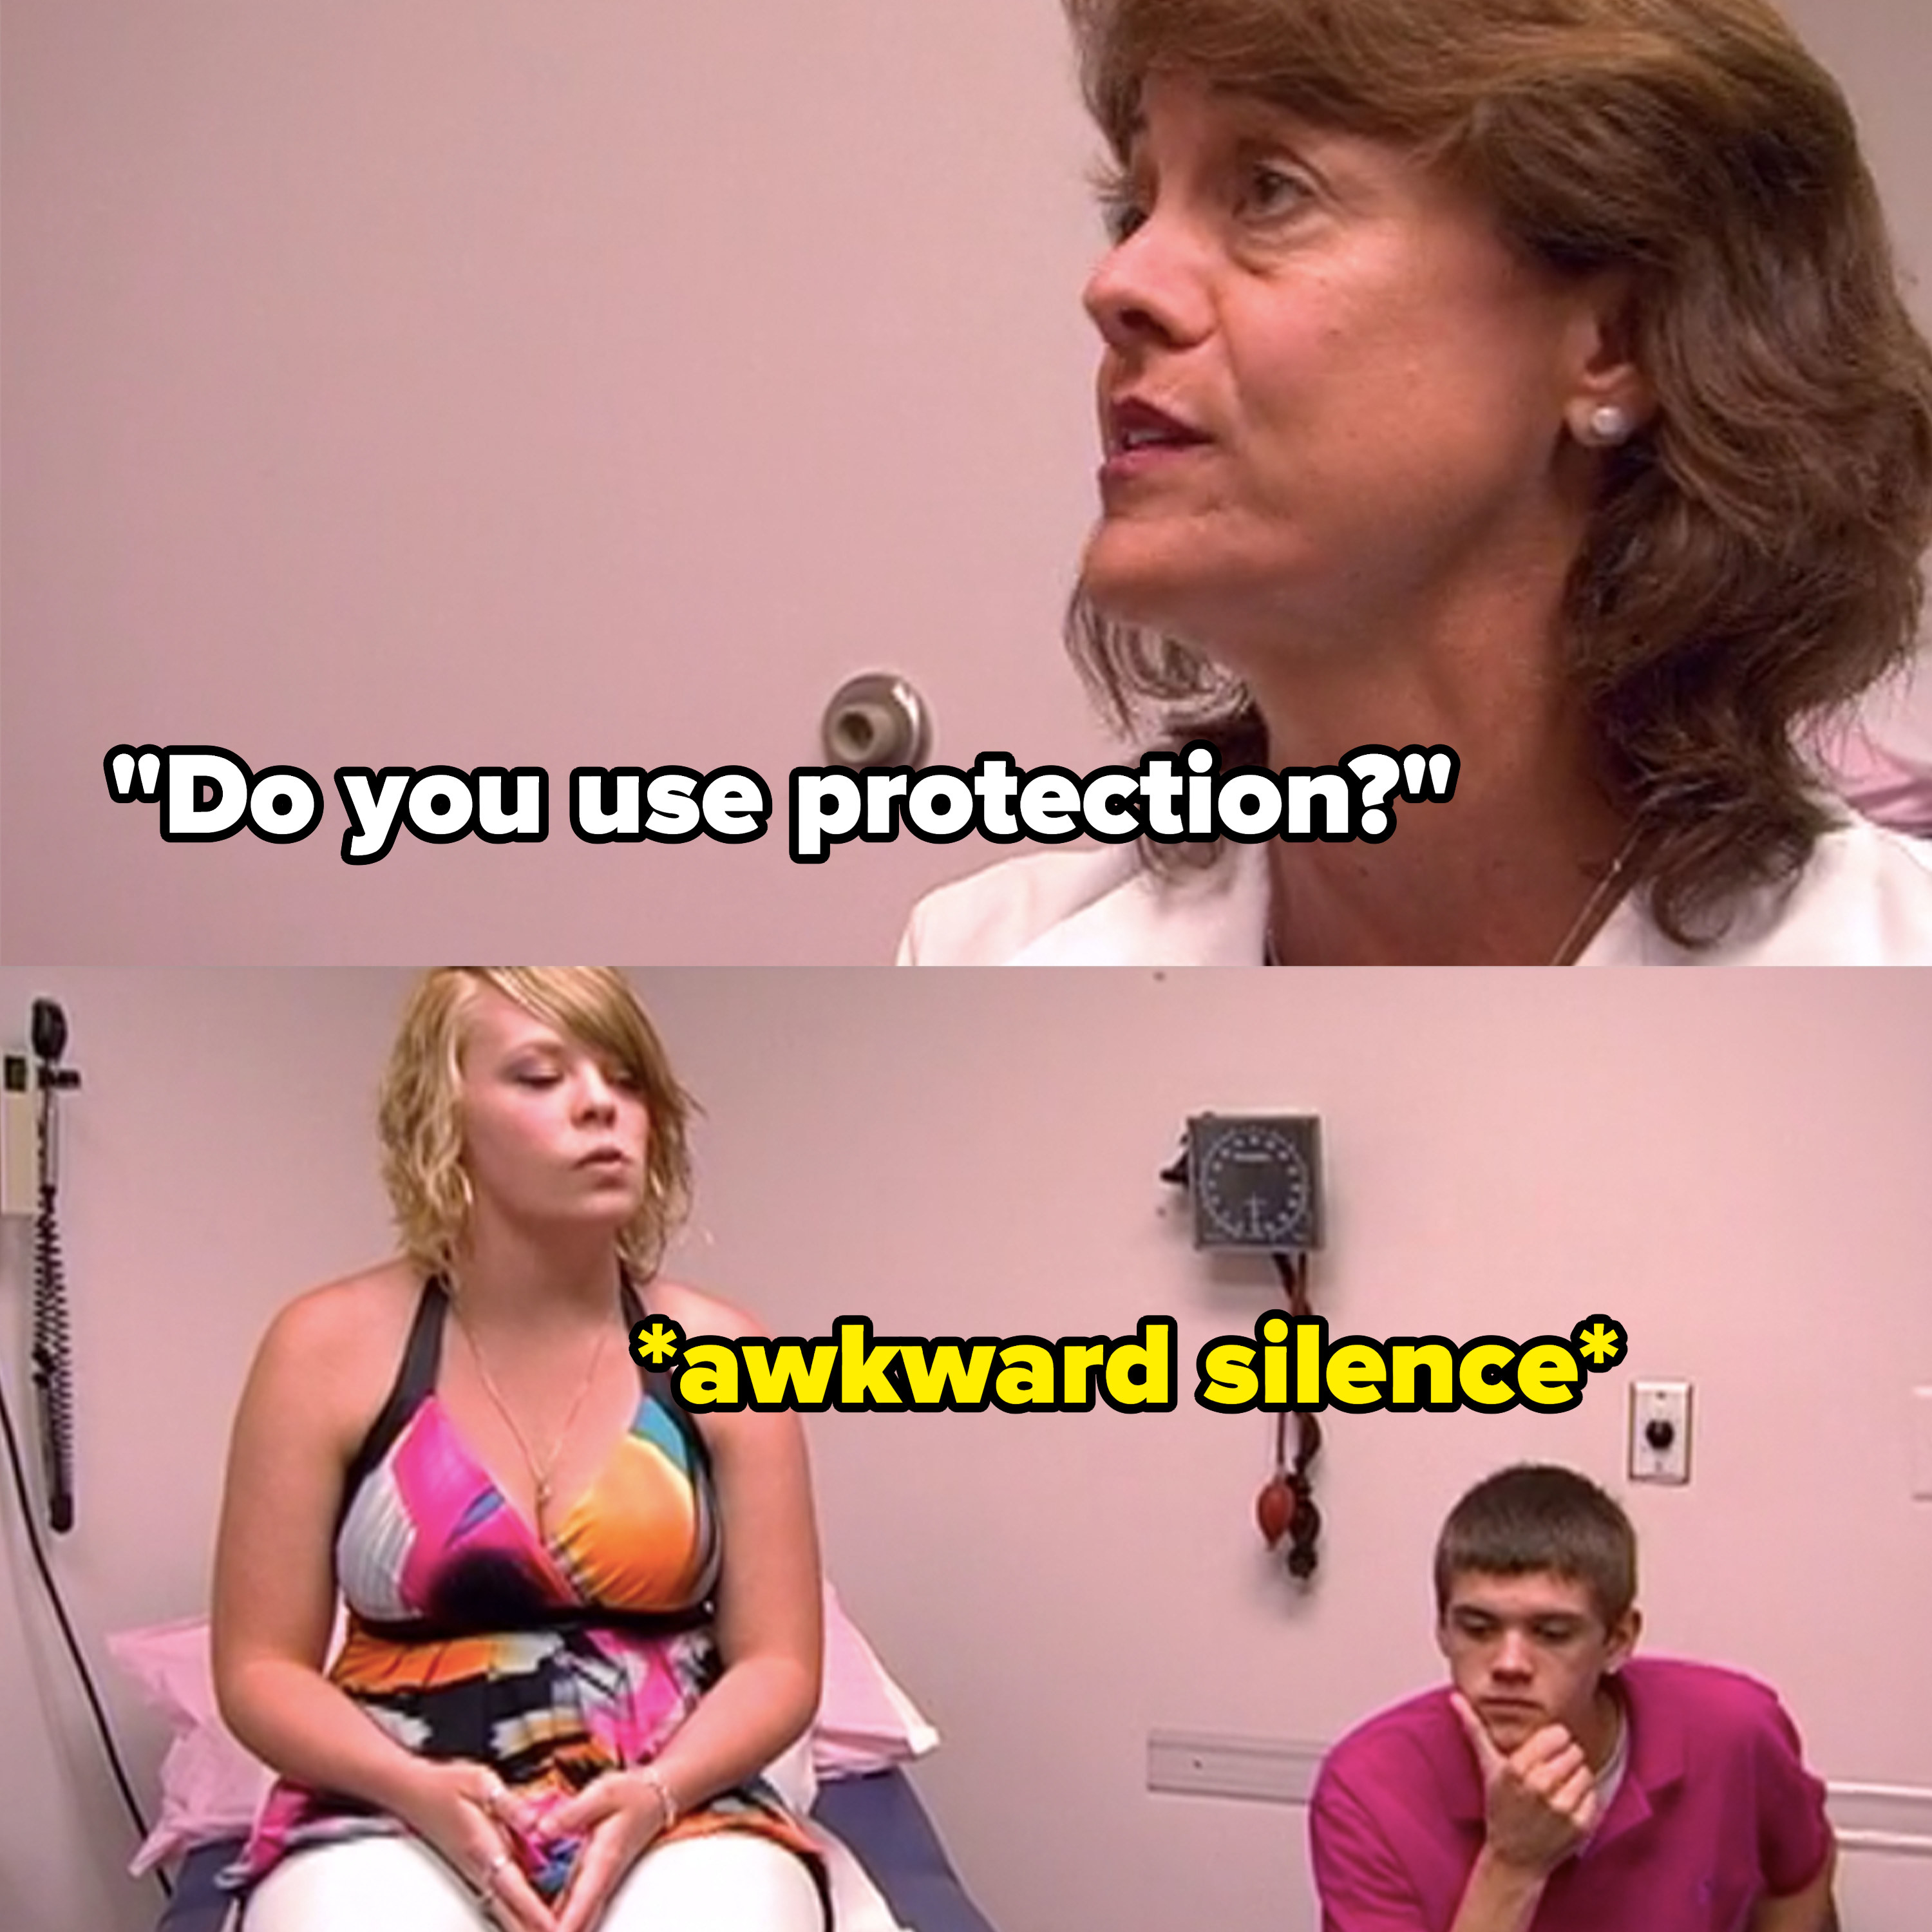 the doctor asks if they use protection, they just sit there in silence for a moment